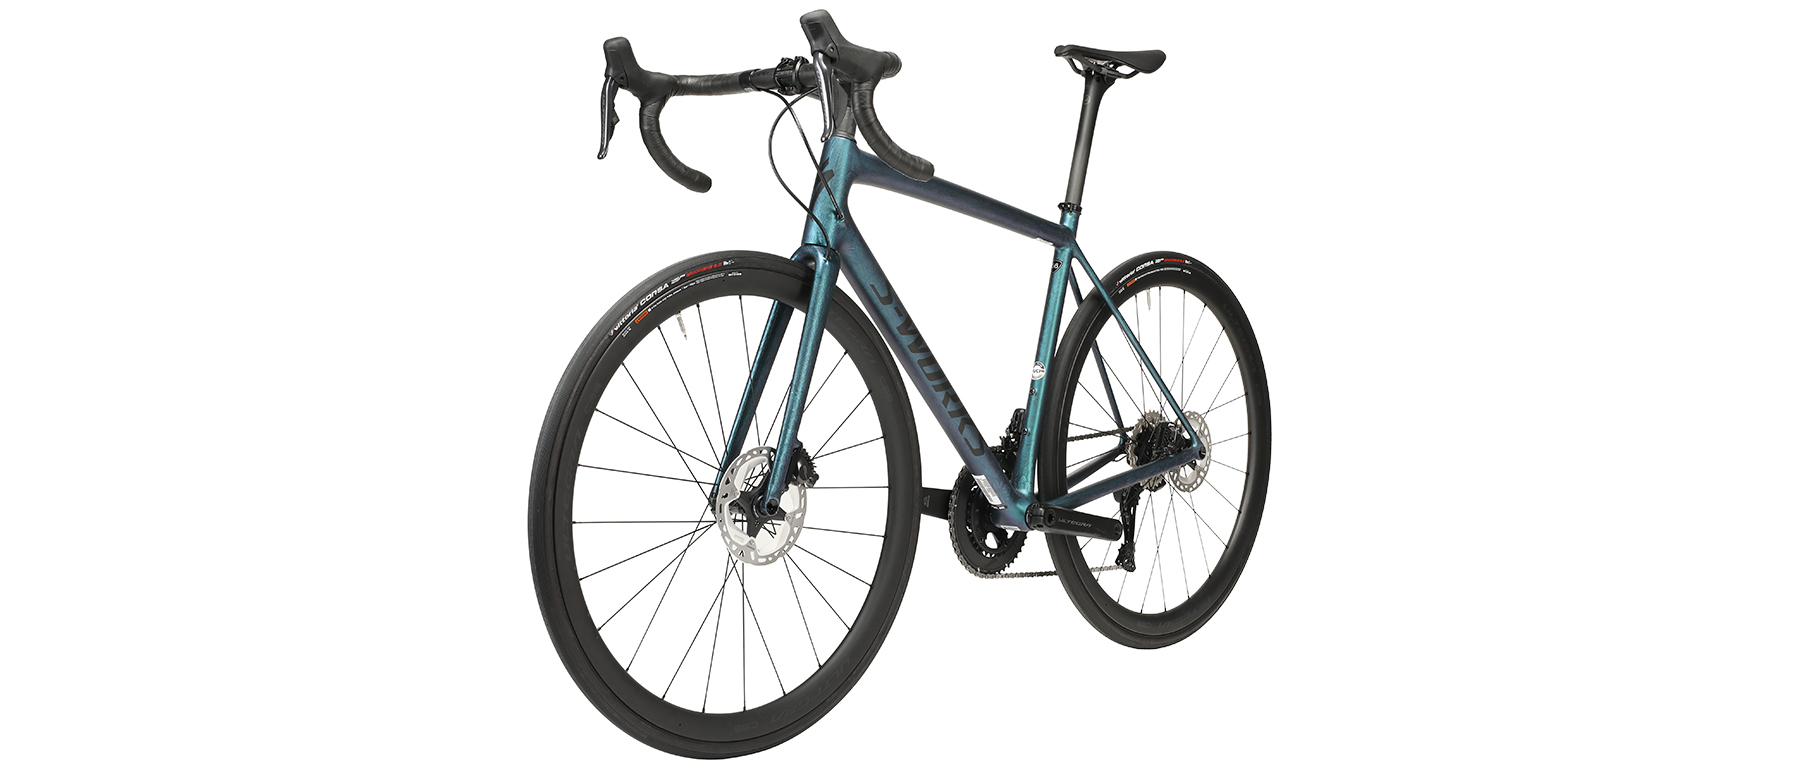 Specialized S-Works Aethos Ultegra Di2 12-Speed Bicycle